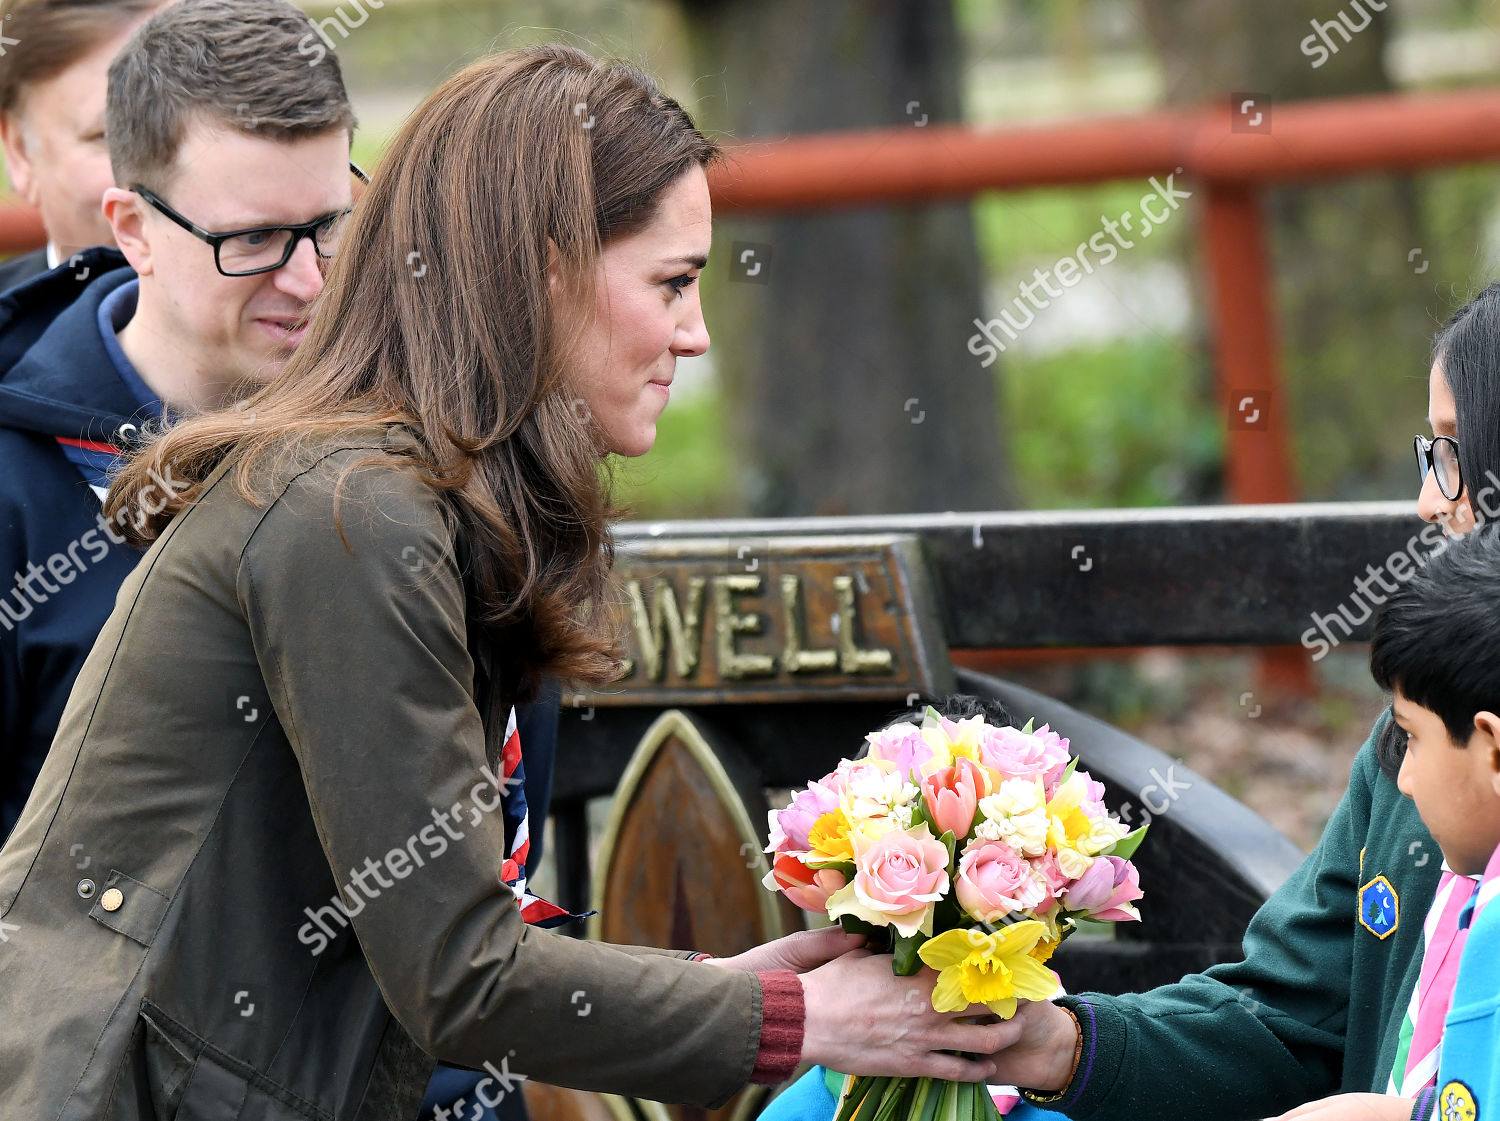 catherine-duchess-of-cambridge-visit-to-the-scouts-gilwell-park-essex-uk-shutterstock-editorial-10179979i.jpg